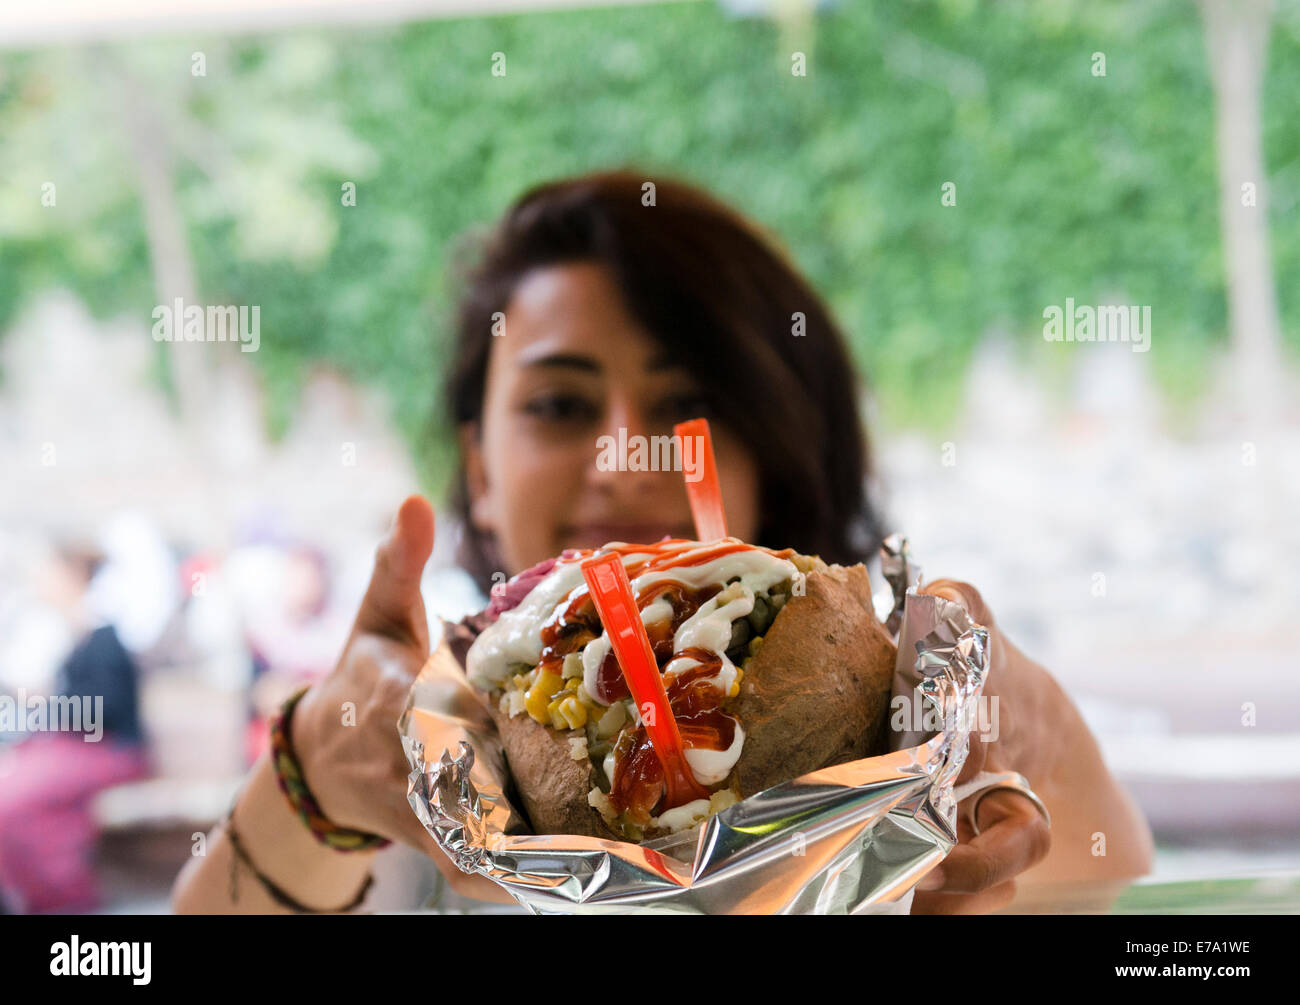 Kumpir- Istanbul style of baked potato stuffed with different fillings. Stock Photo